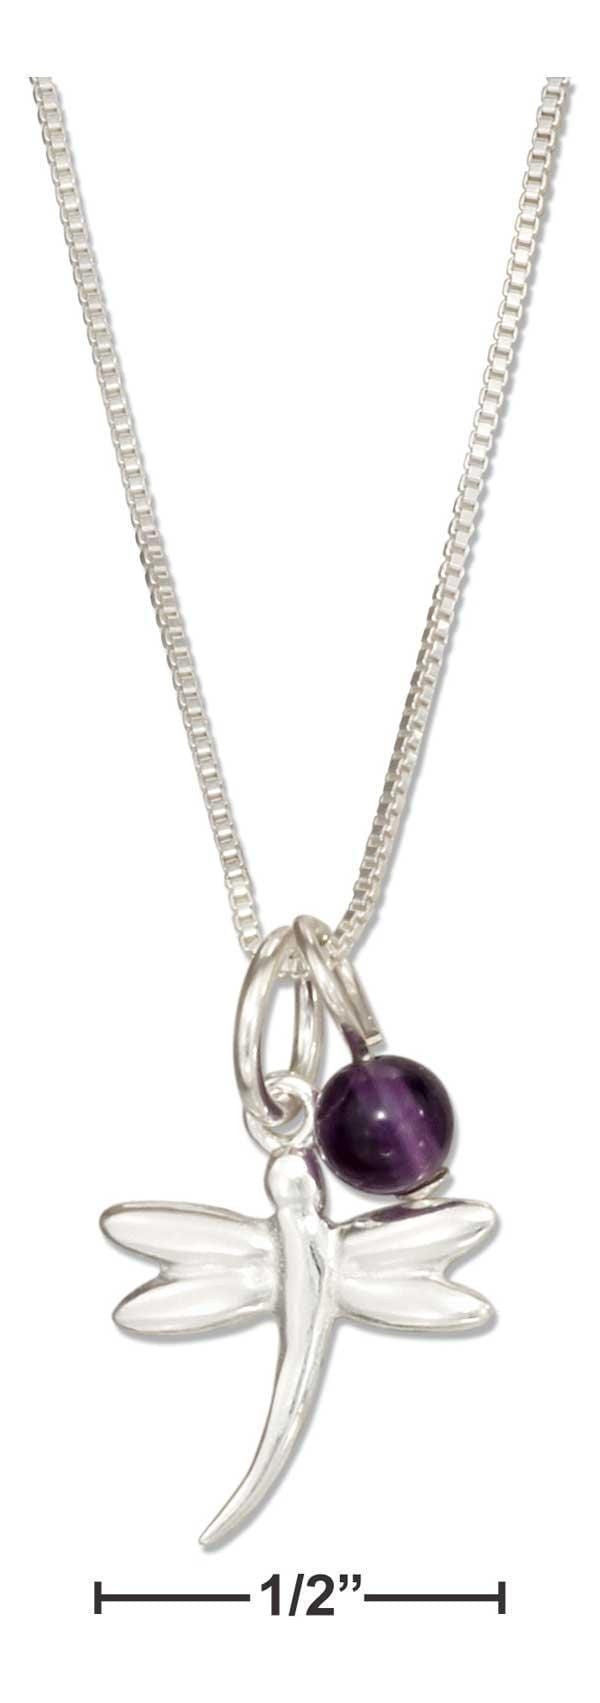 Silver Necklaces Sterling Silver Necklace:  18" Dragonfly Pendant Necklace With Amethyst Bead JadeMoghul Inc.